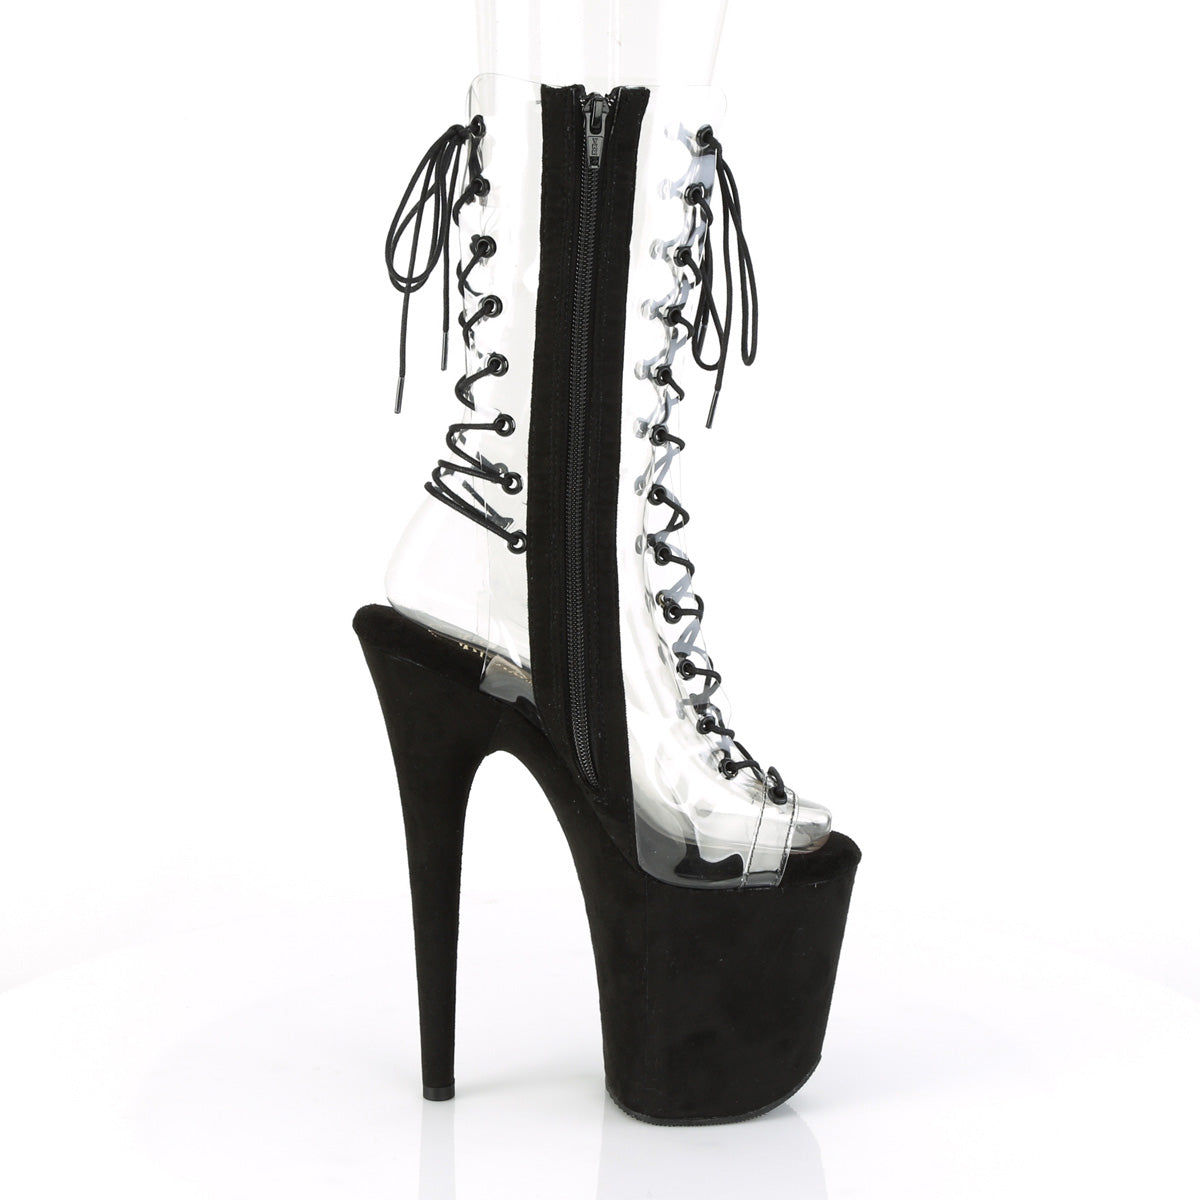 FLAMINGO-800-60FS Pleaser Pole Dancing Shoes Ankle Boots Pleasers - Sexy Shoes Fetish Heels